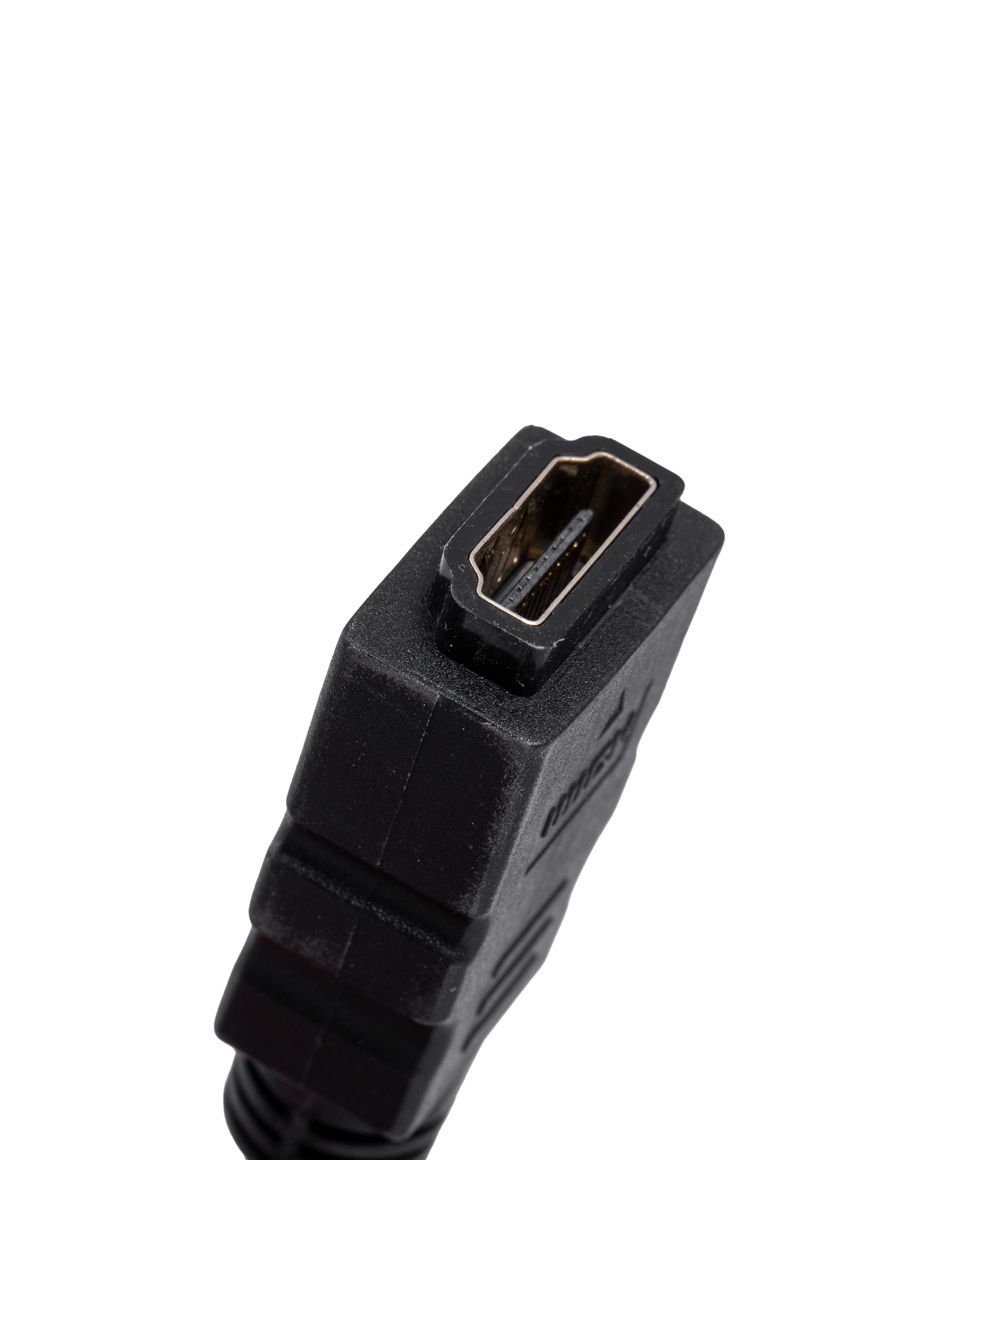 HDMI EXTENTION CABLE 1.5M 2B DC173